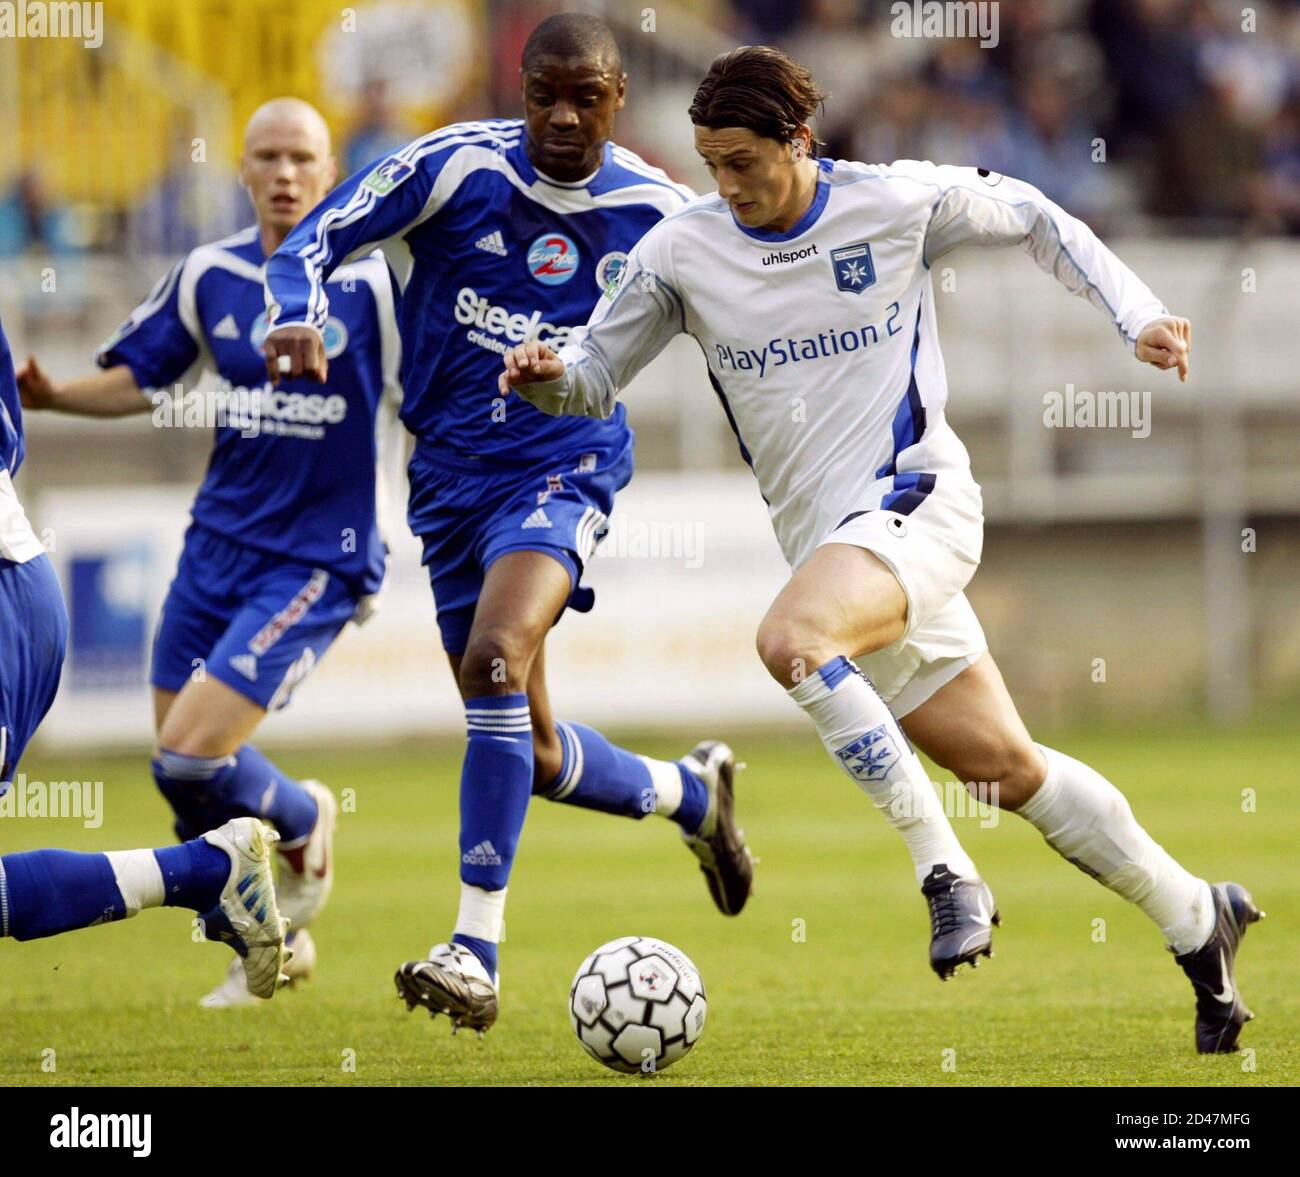 Luigi Pieroni (R) of Auxerre challenges Christian Bassila of Strasbourg  during their French Ligue 1 soccer match at l'Abbe Deschamps stadium in  Auxerre April 17, 2005. REUTERS/Christophe Saidi Stock Photo - Alamy